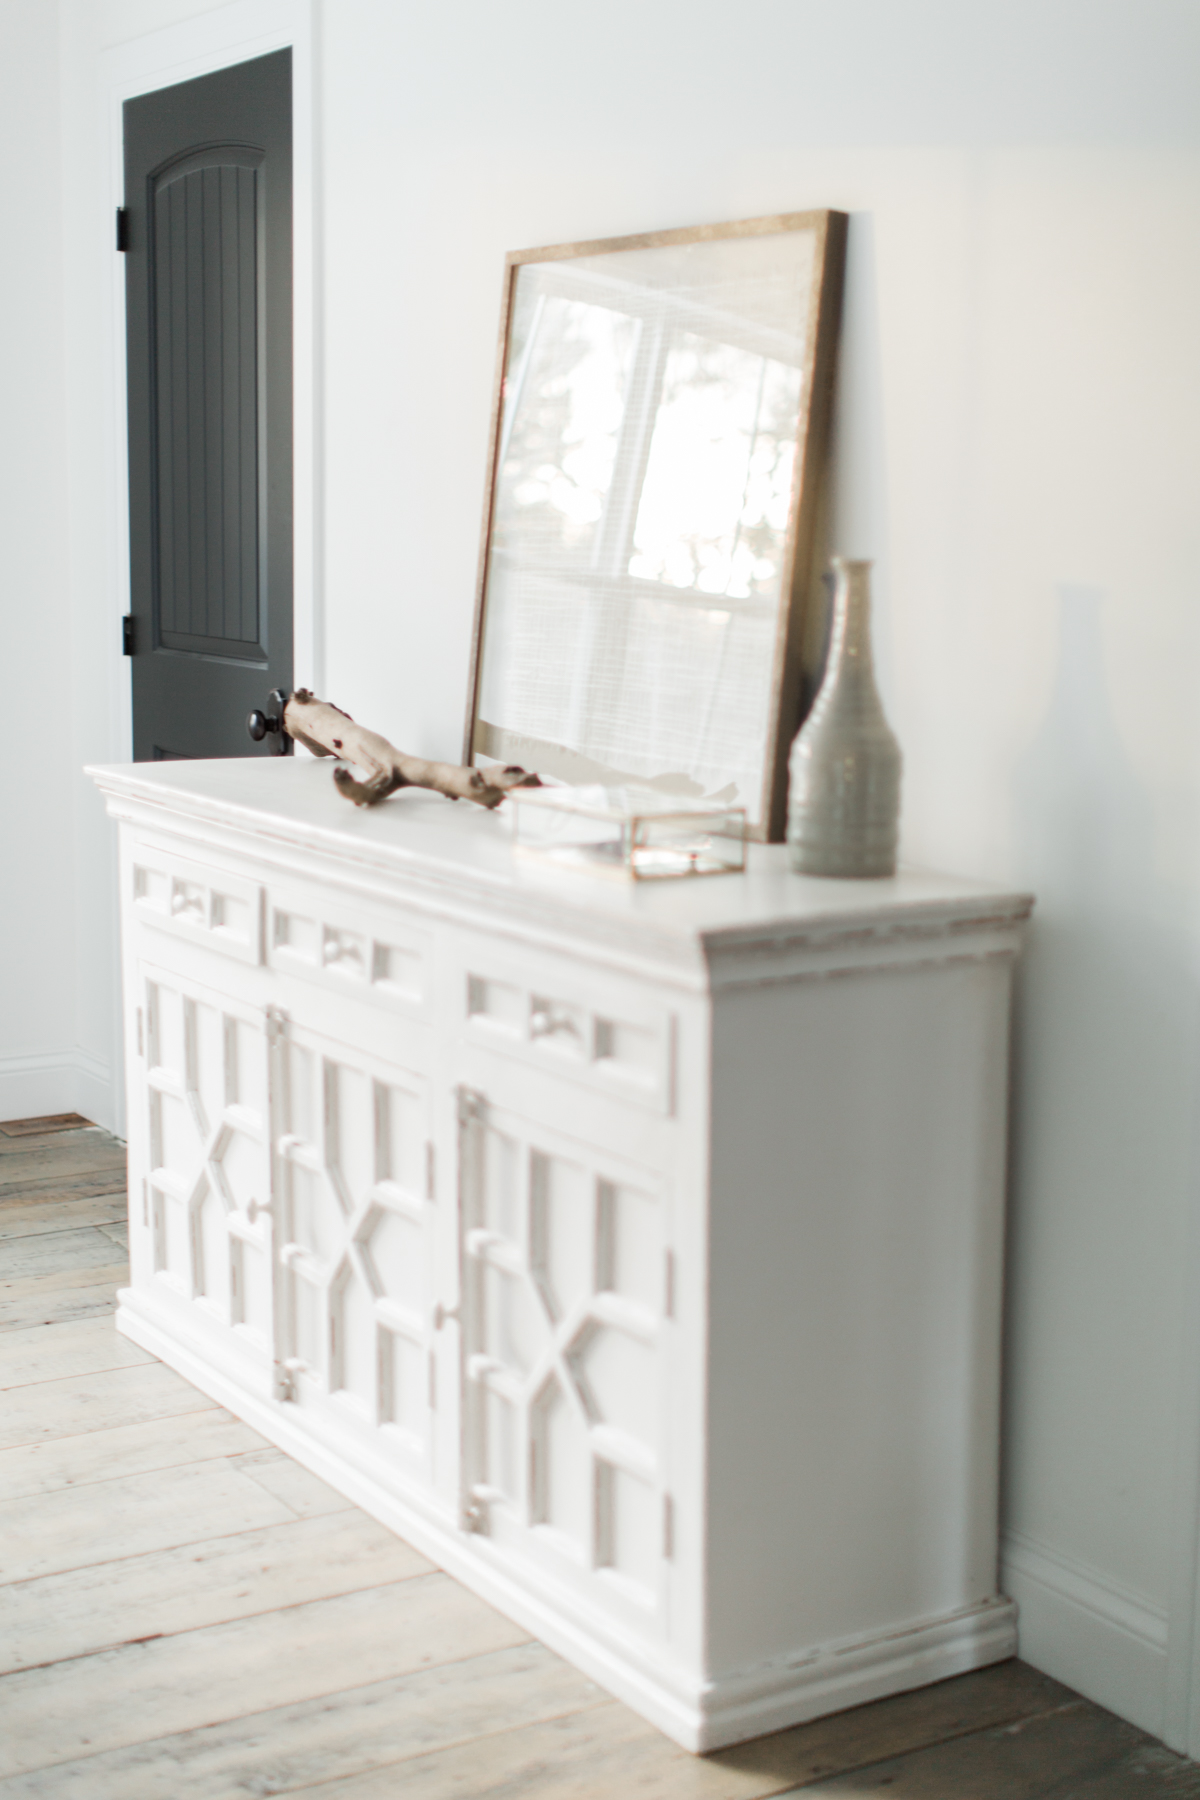 INSPIRED BY THIS - PURPOSEFUL BALANCED BRIGHT RELAXED - HOUZZ